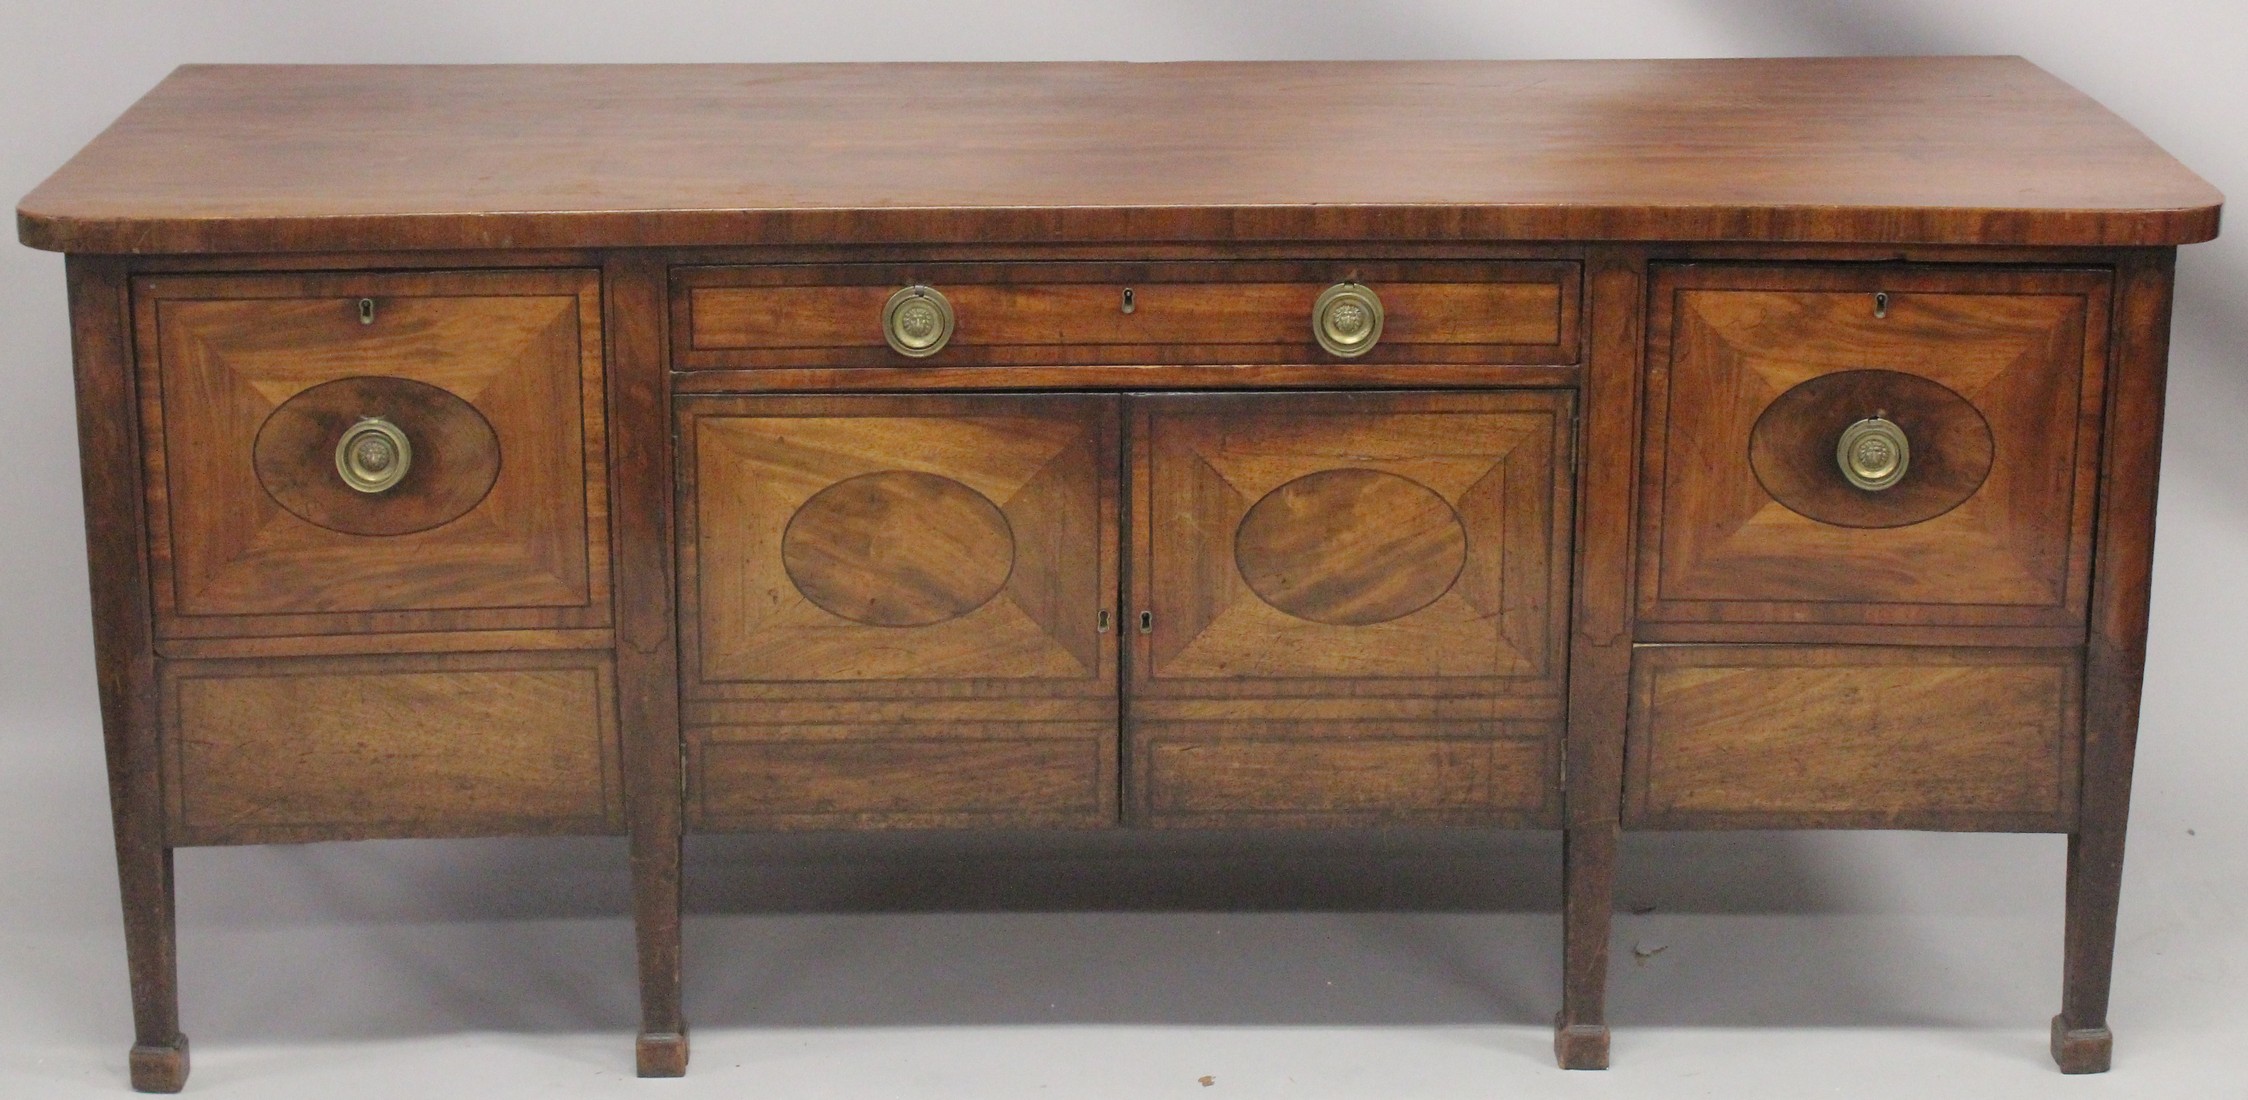 A GOOD GEORGE III MAHOGANY STRAIGHT FRONTED SIDEBOARD with plain legs and ovals to the front, with